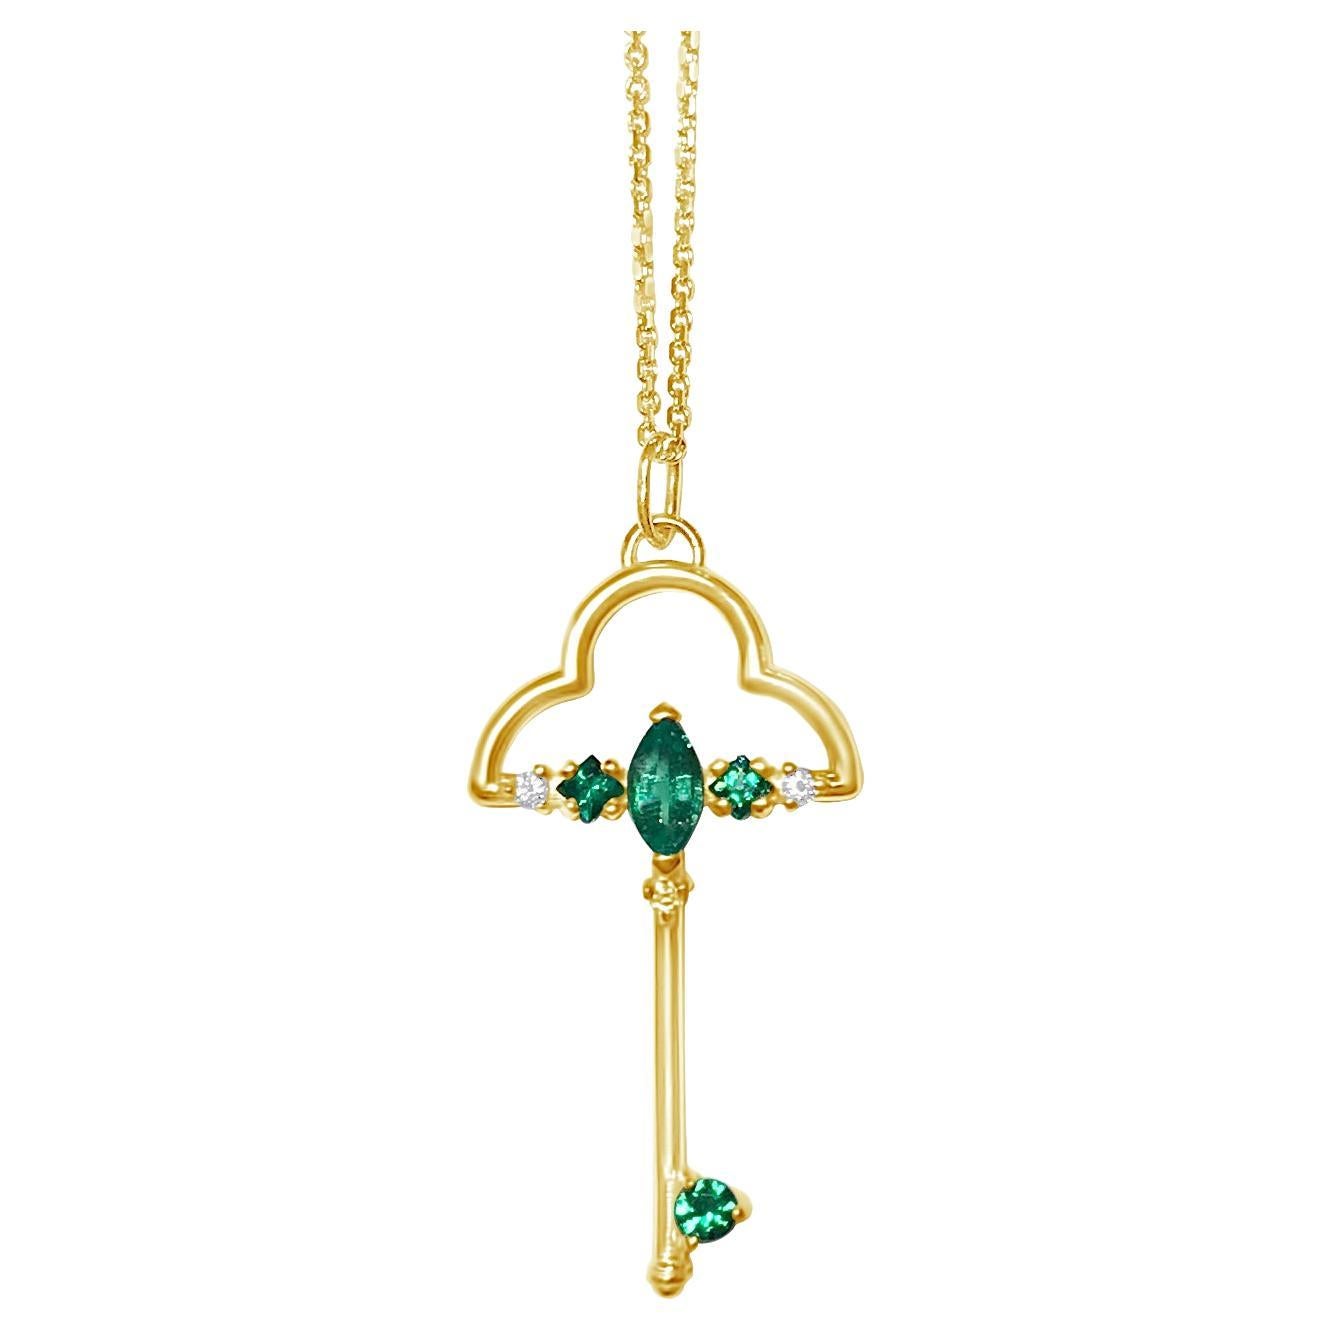 Key emerald and diamond necklace For Sale